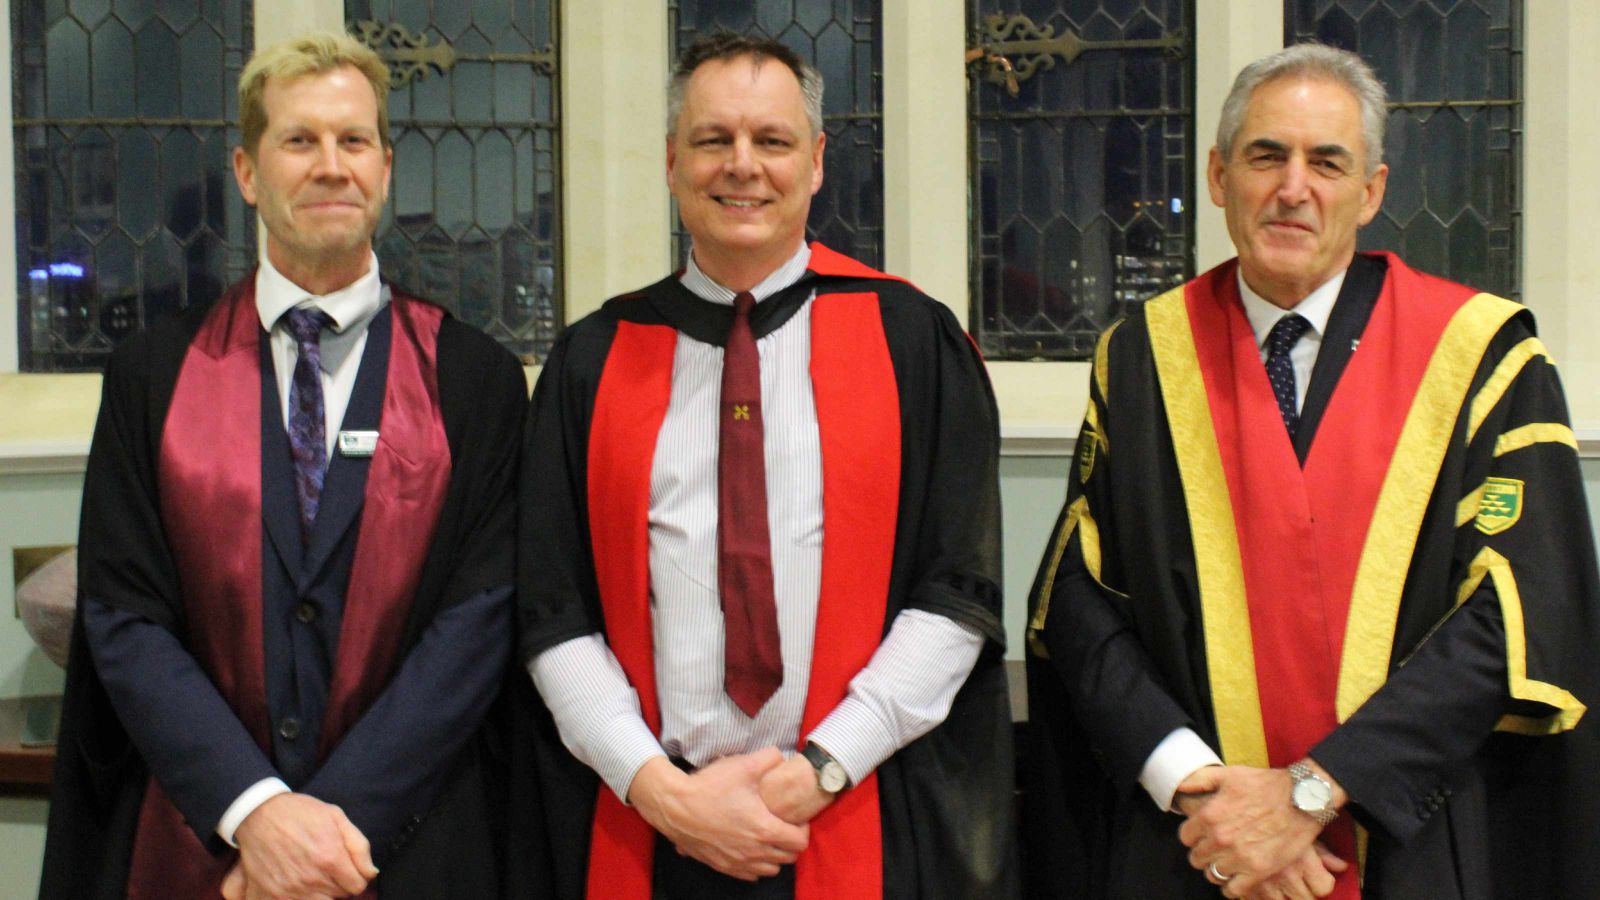 Deputy Pro-Vice-Chancellor Dave Harper, new Professor Richard Arnold and Vice-Chancellor Grant Guilford in academic robes in the Hunter building.